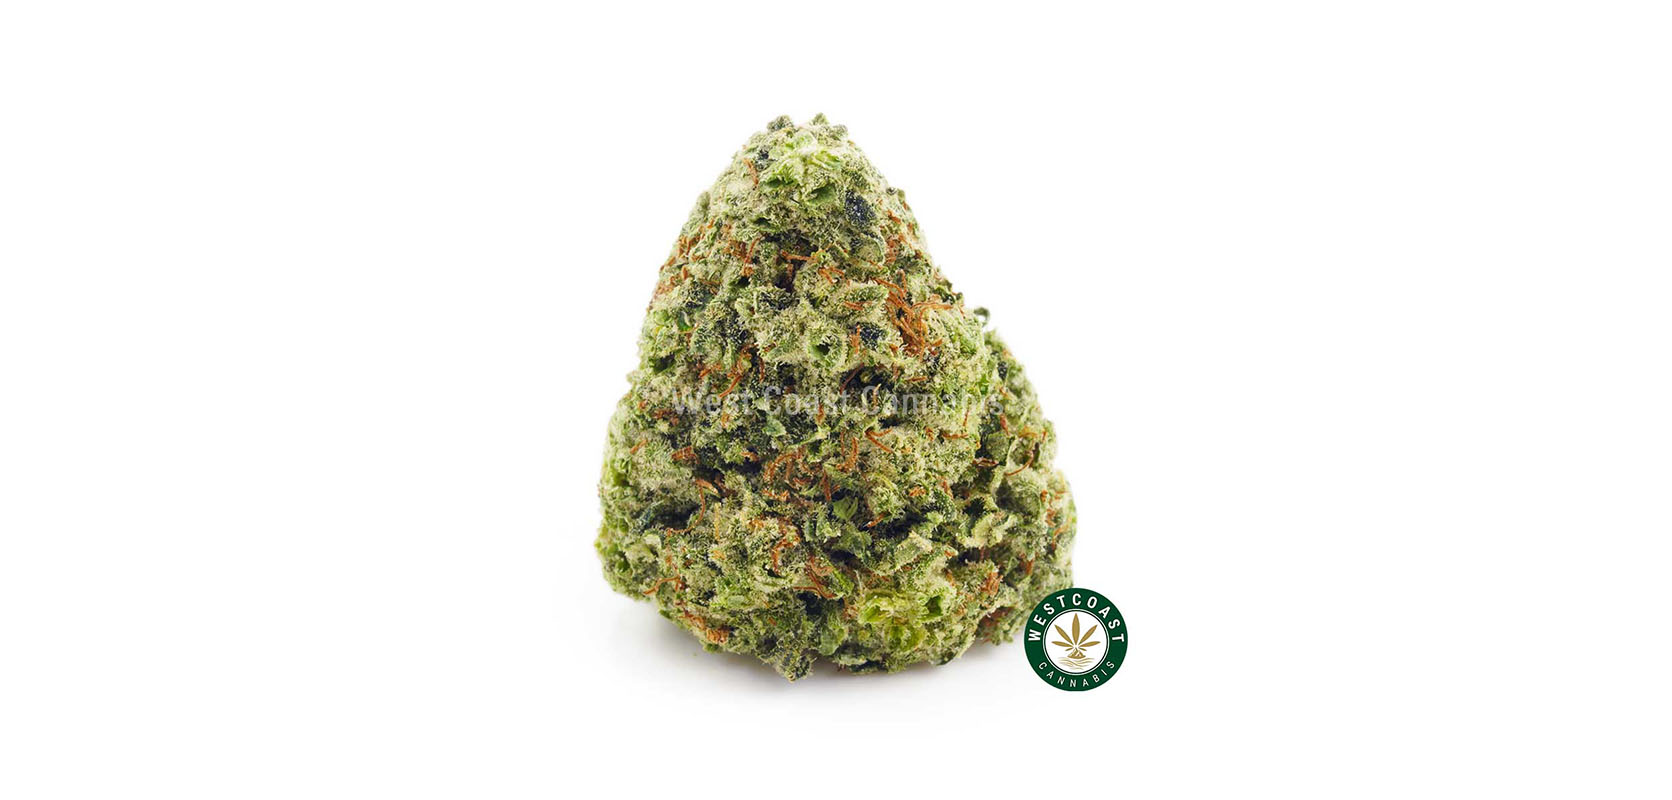 Candly land bud nug. Buy online weeds from top online dispensary for cannabis canada.